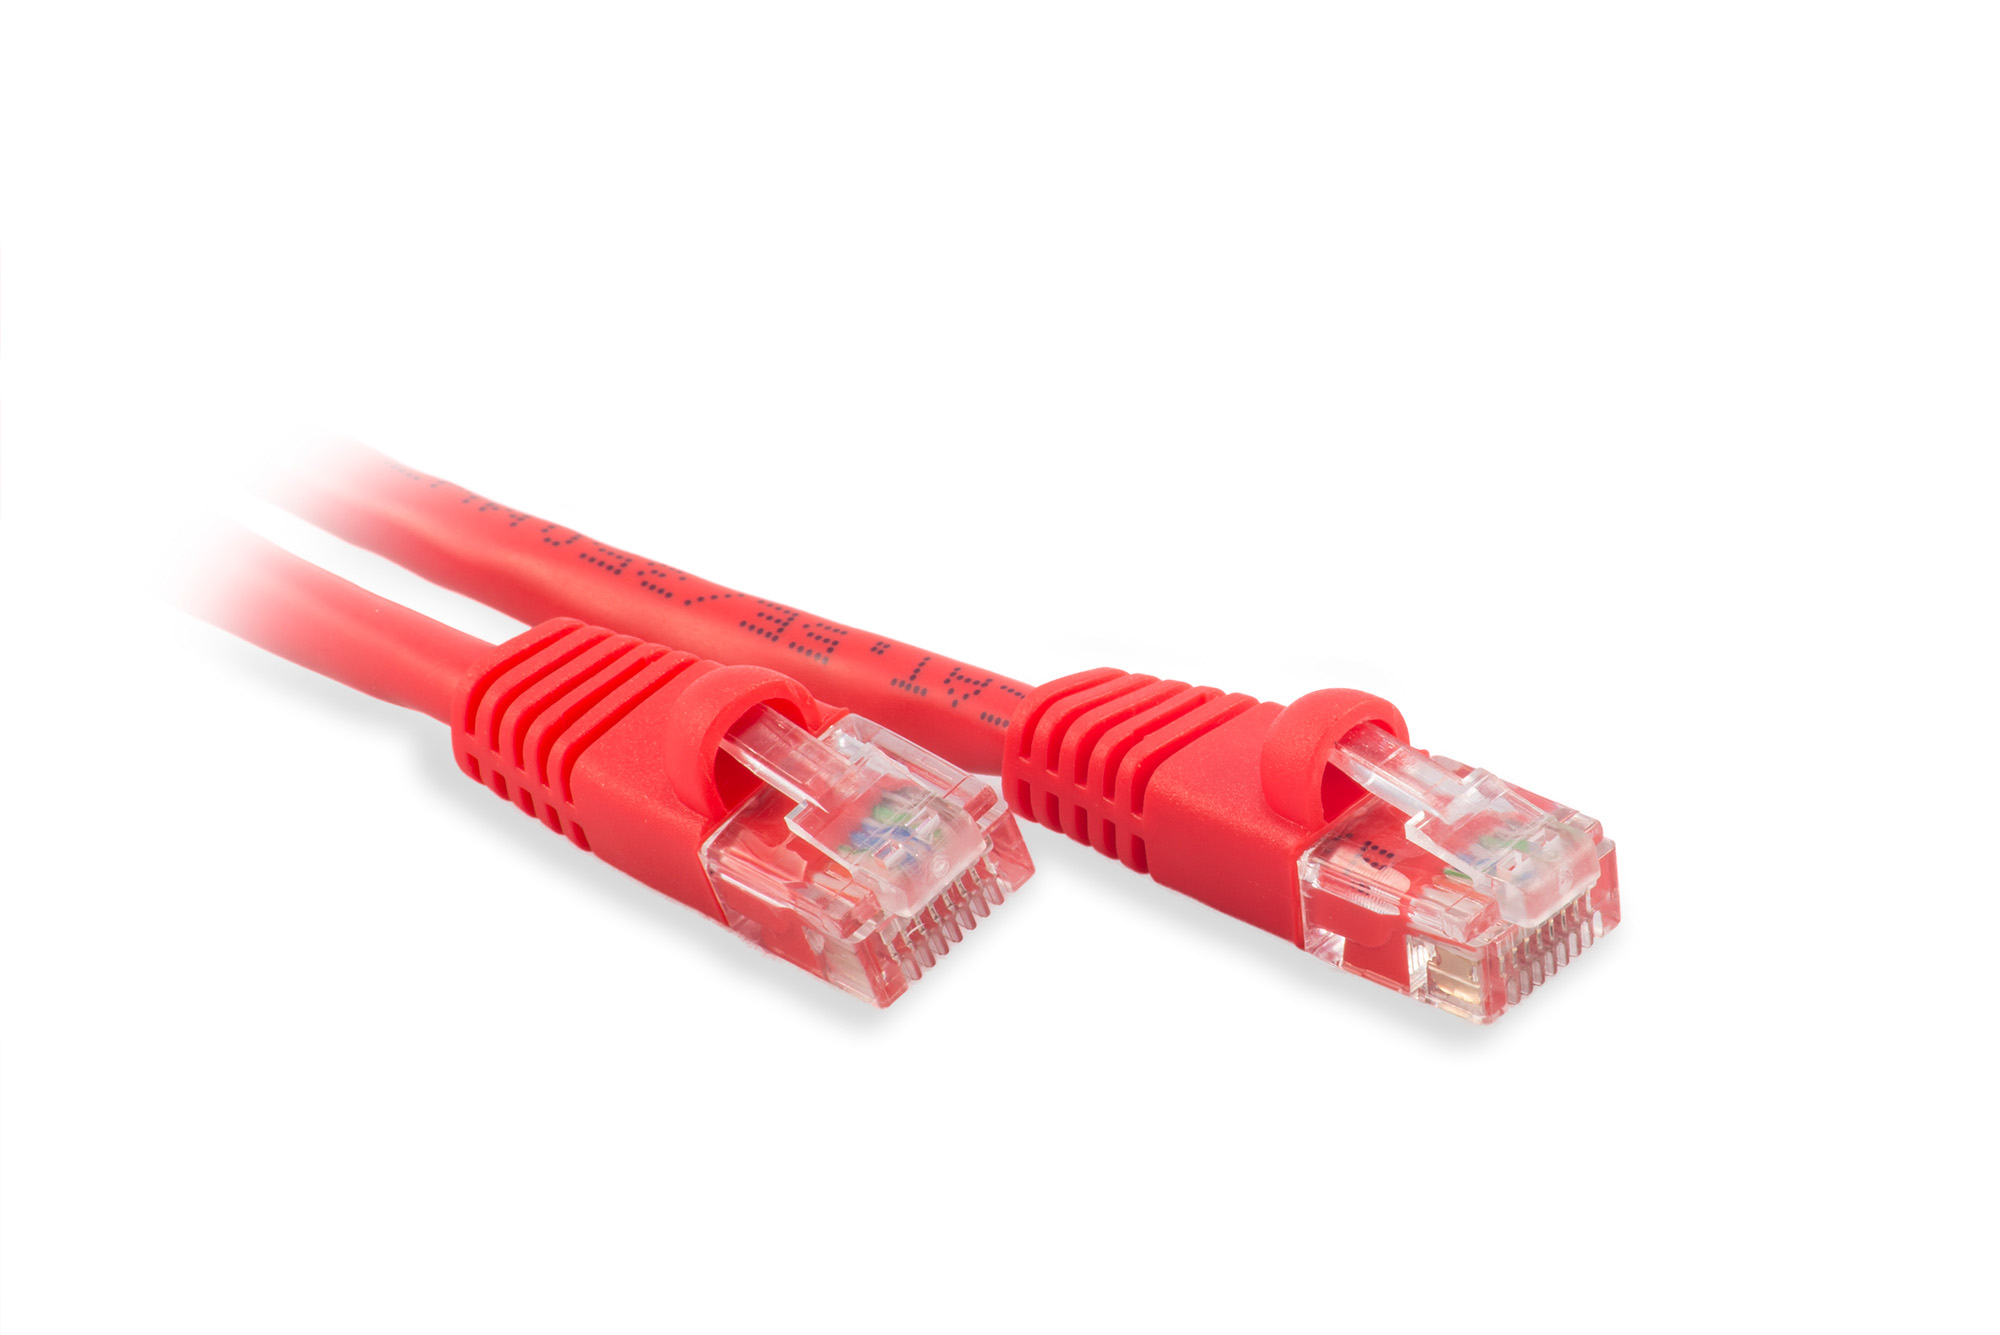 14ft Cat6 Ethernet Patch Cable - Red Color - Snagless Boot, Stranded, RJ45, 550Mhz, 24AWG